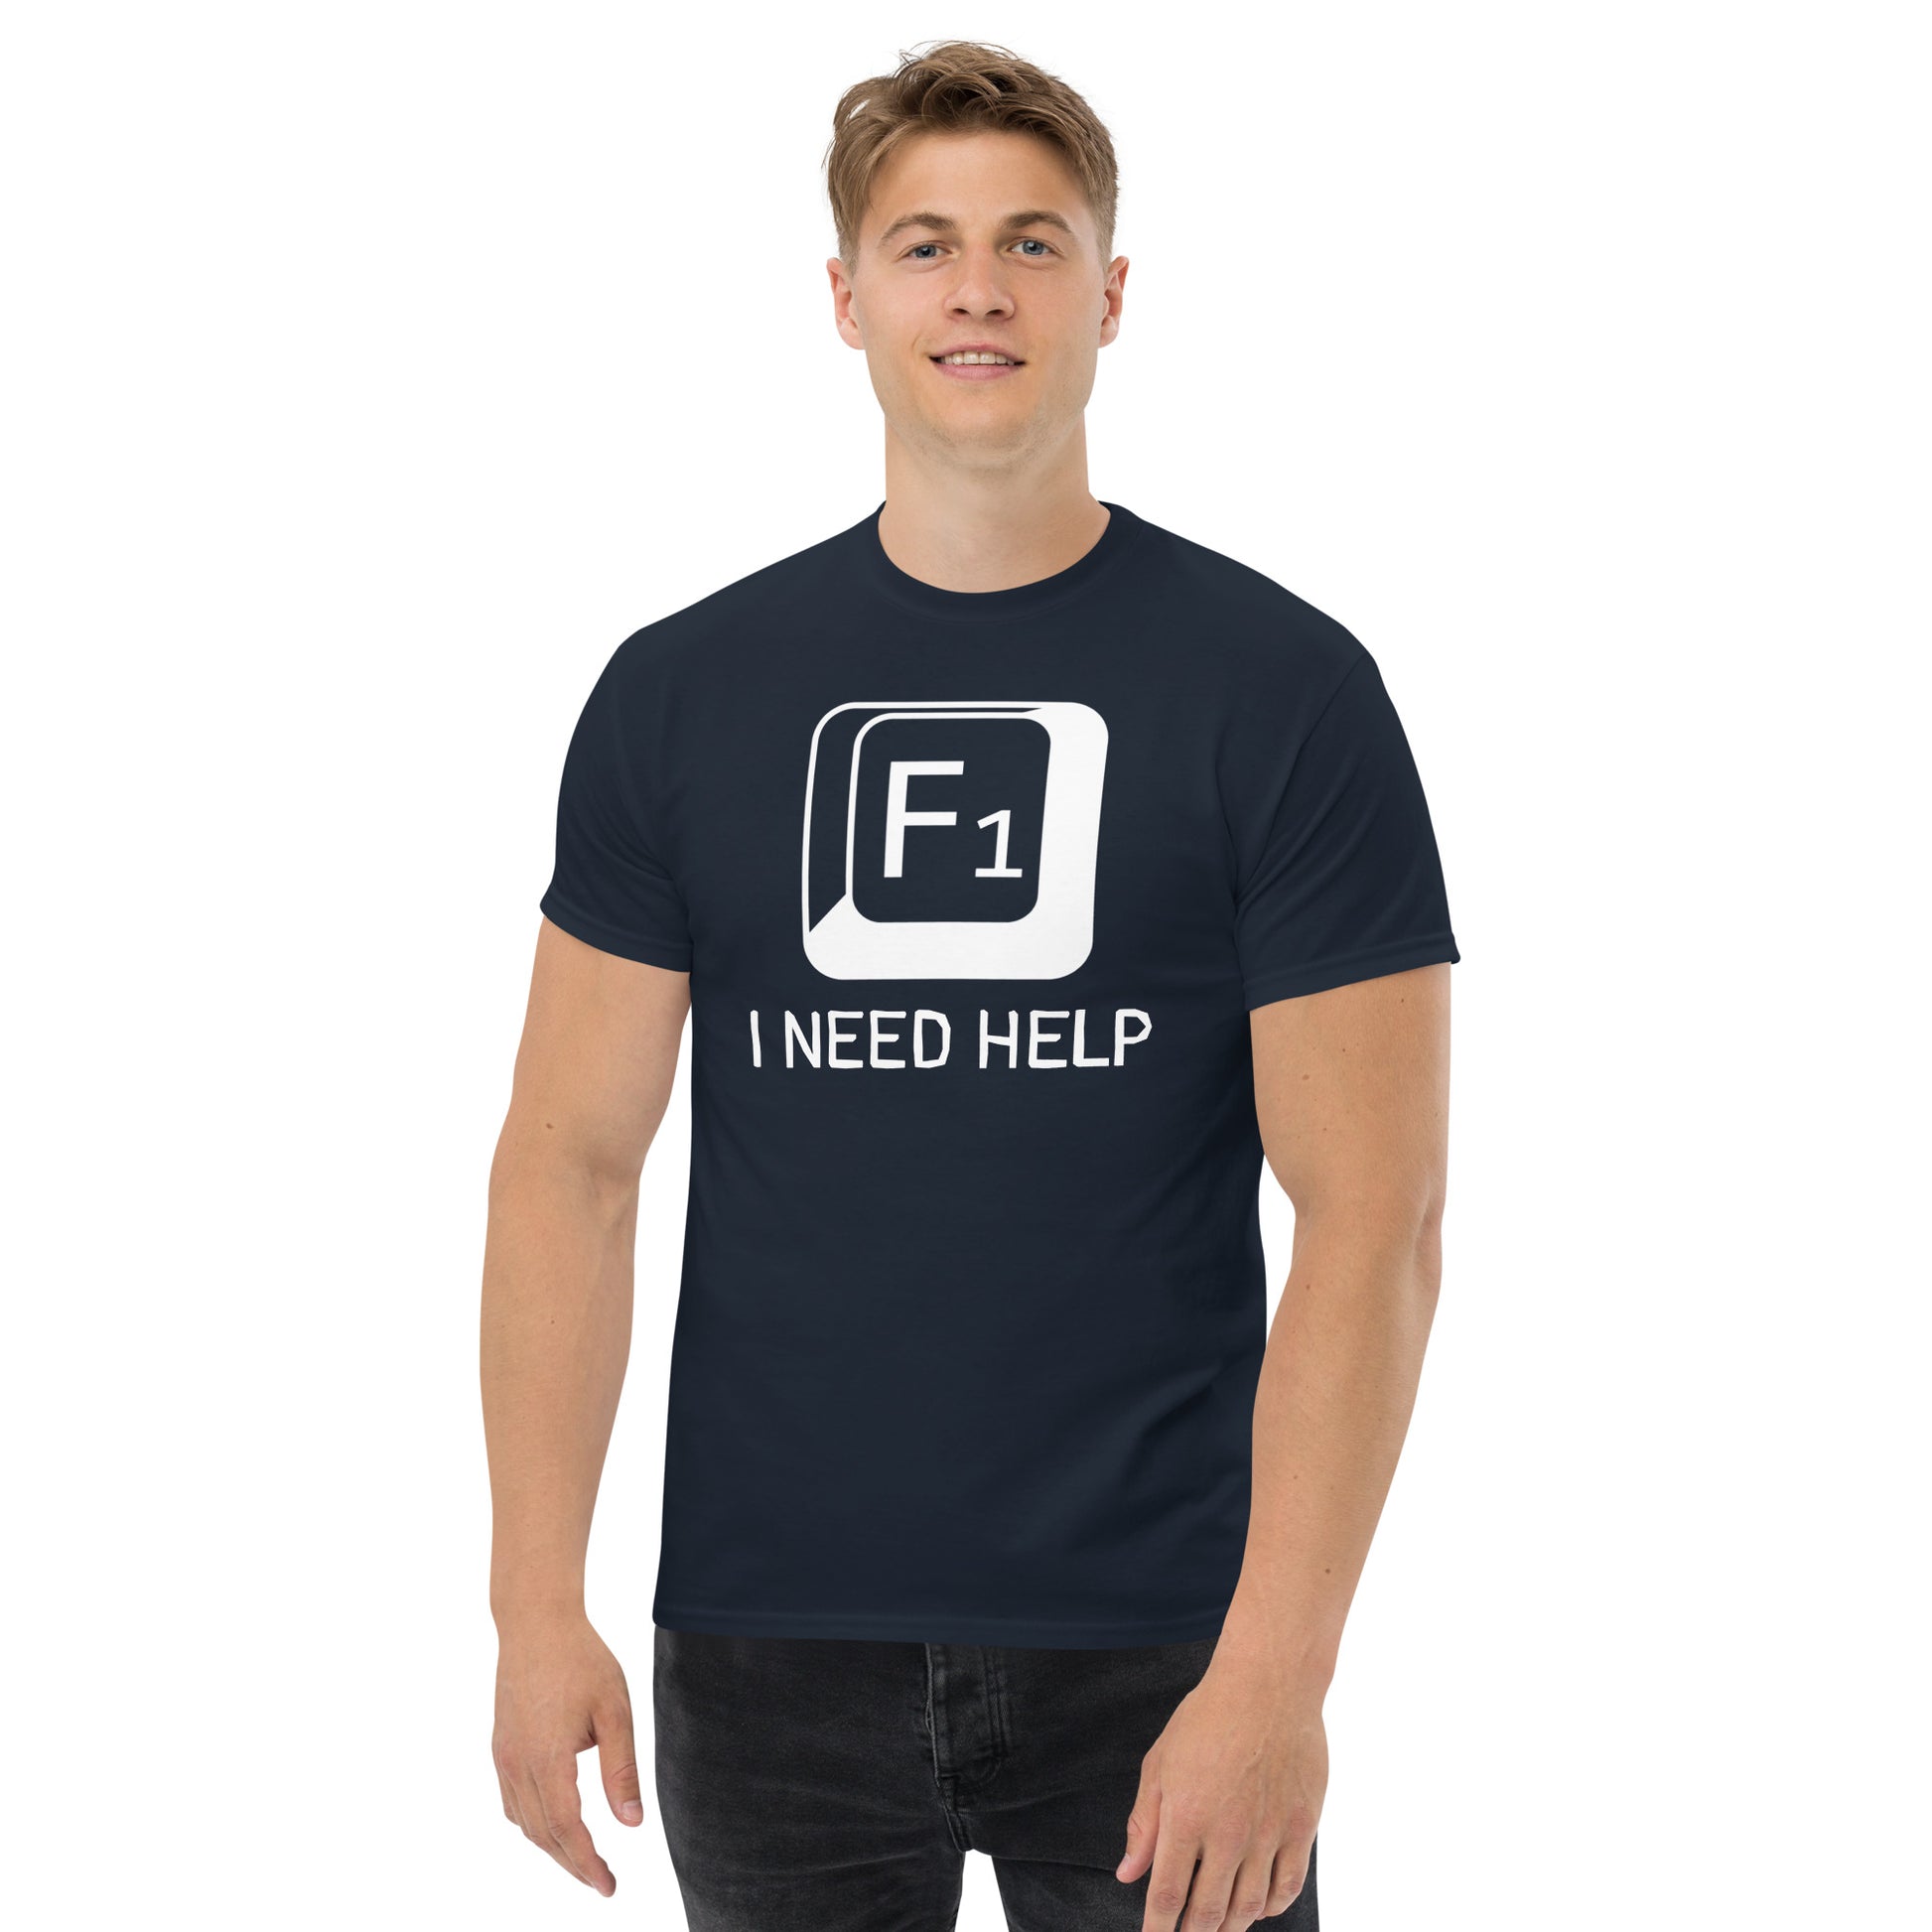 Men with navy T-shirt and a picture of F1 key with text "I need help"